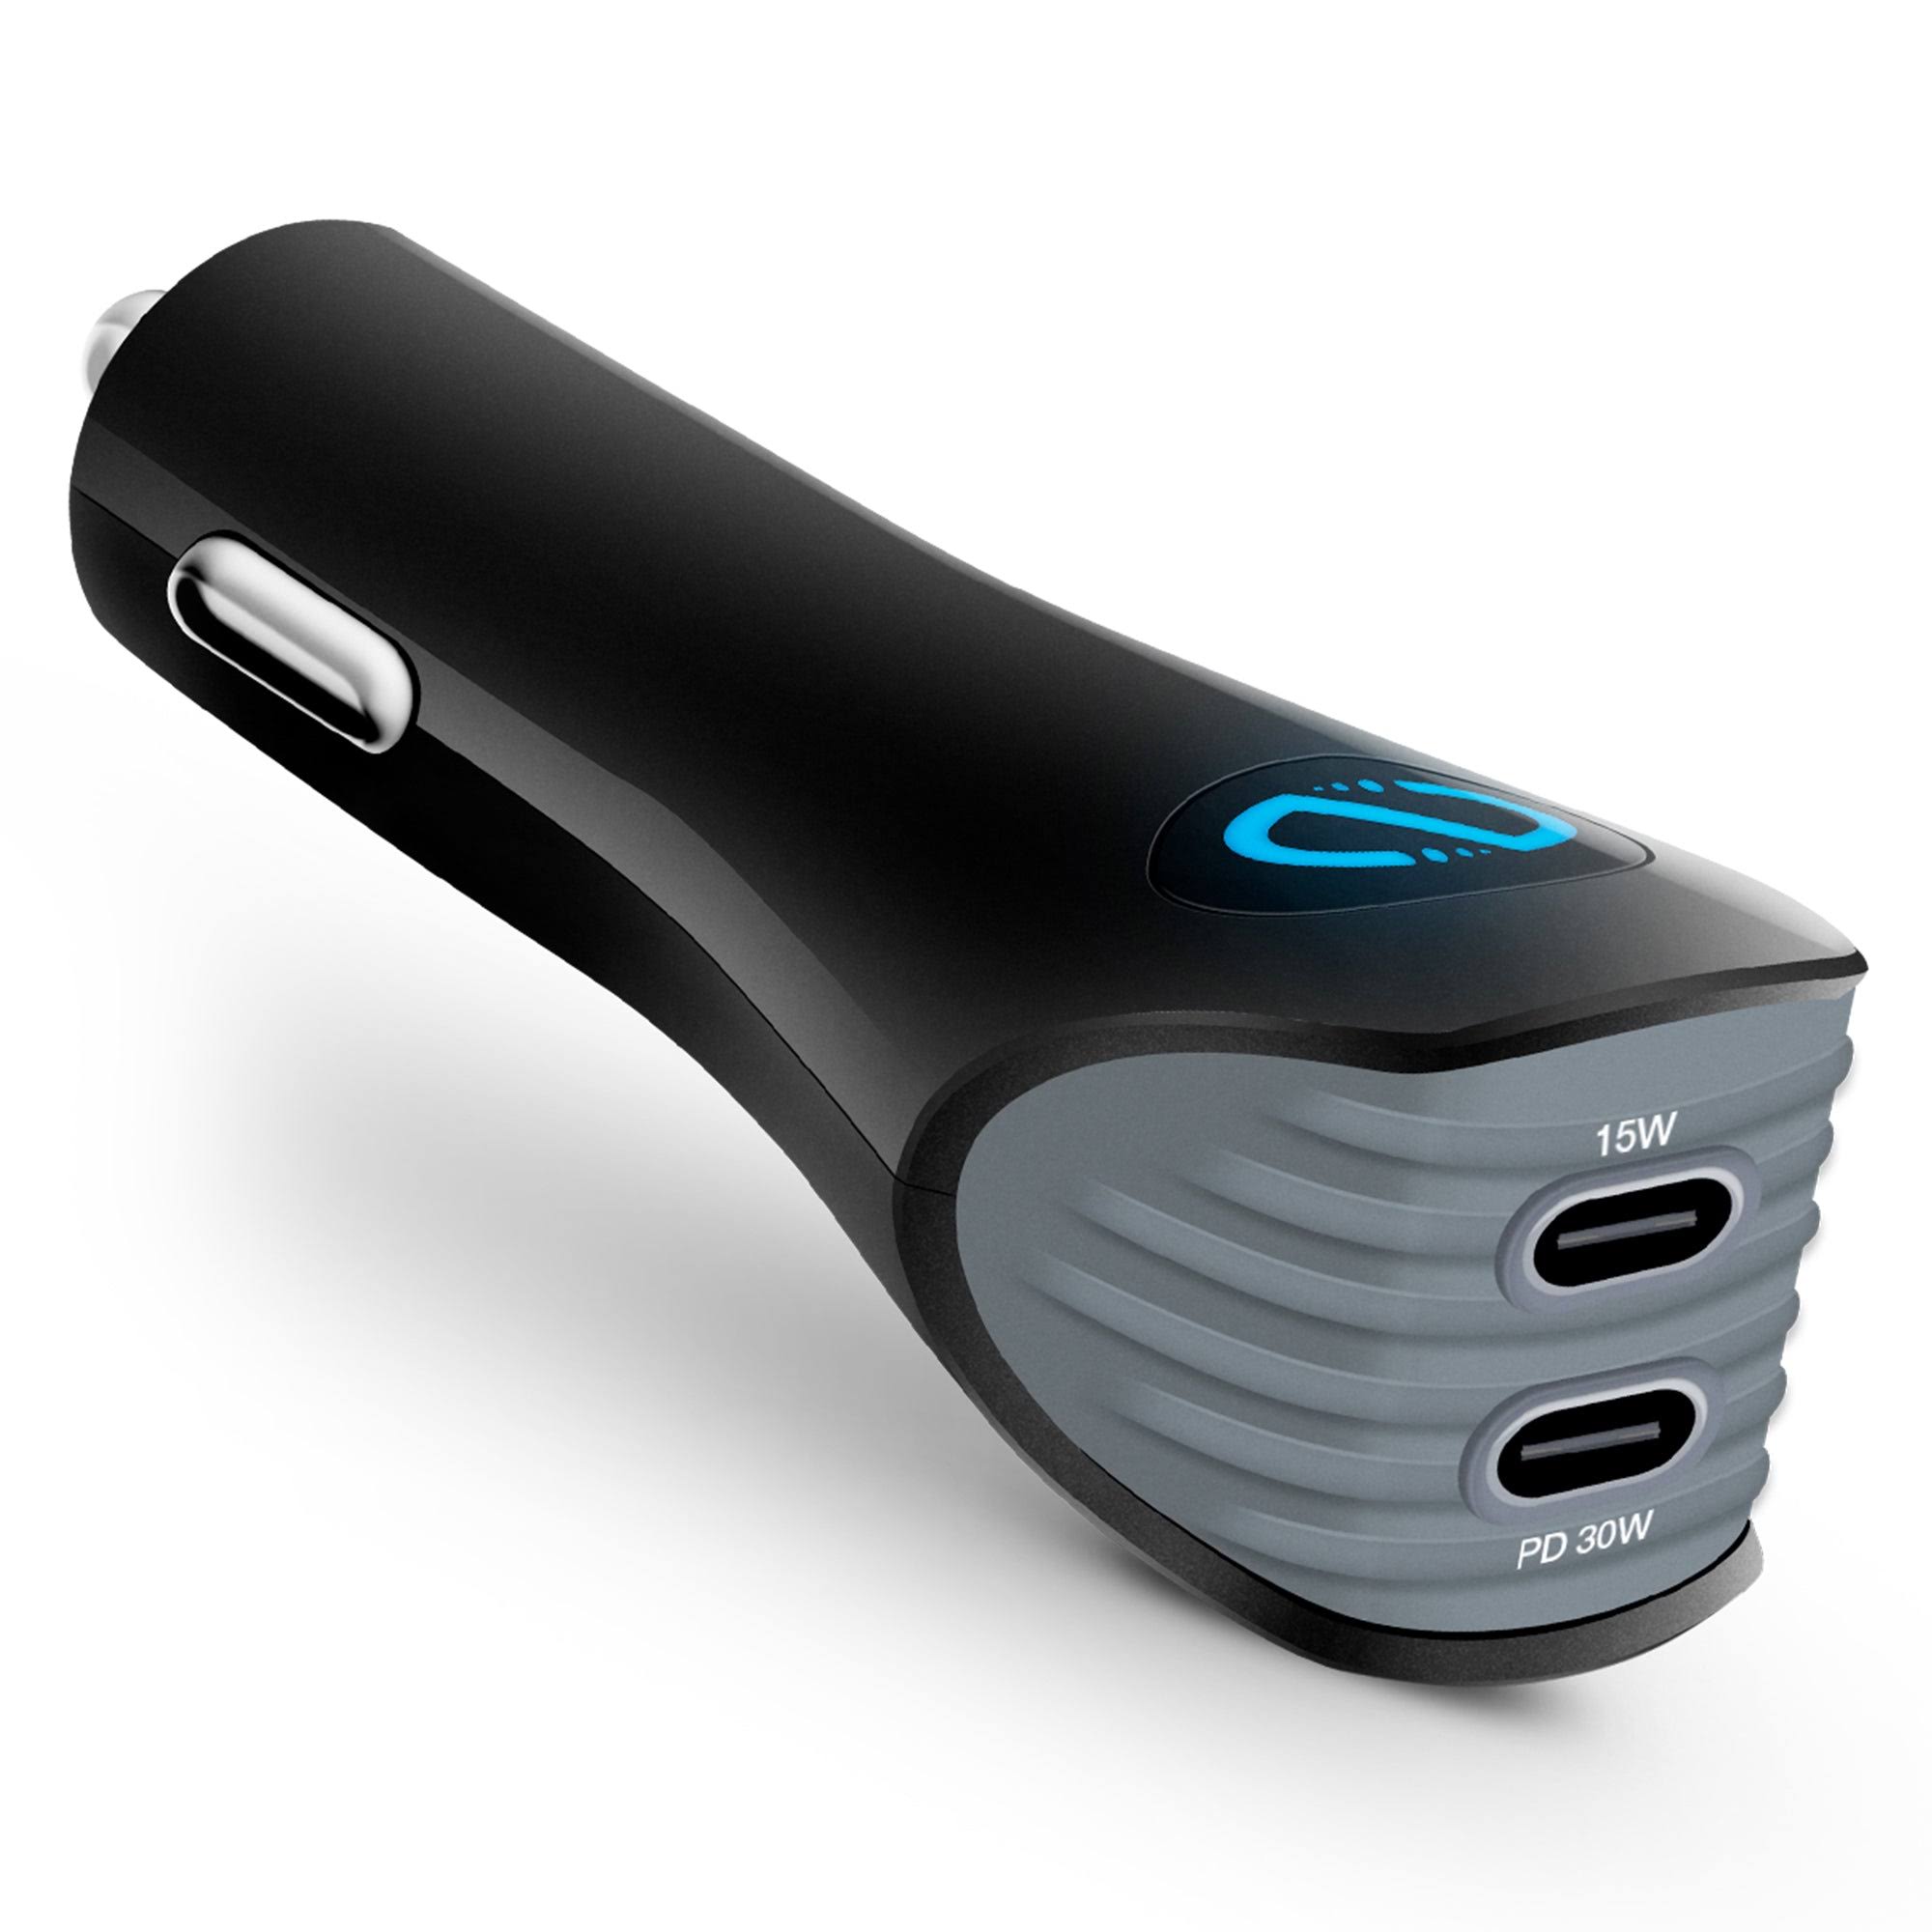 Naztech 30W Dual Port USB Type-C PD Car Charger, USB C 2.0 Only, Standard, Power Delivery PD, Color Black